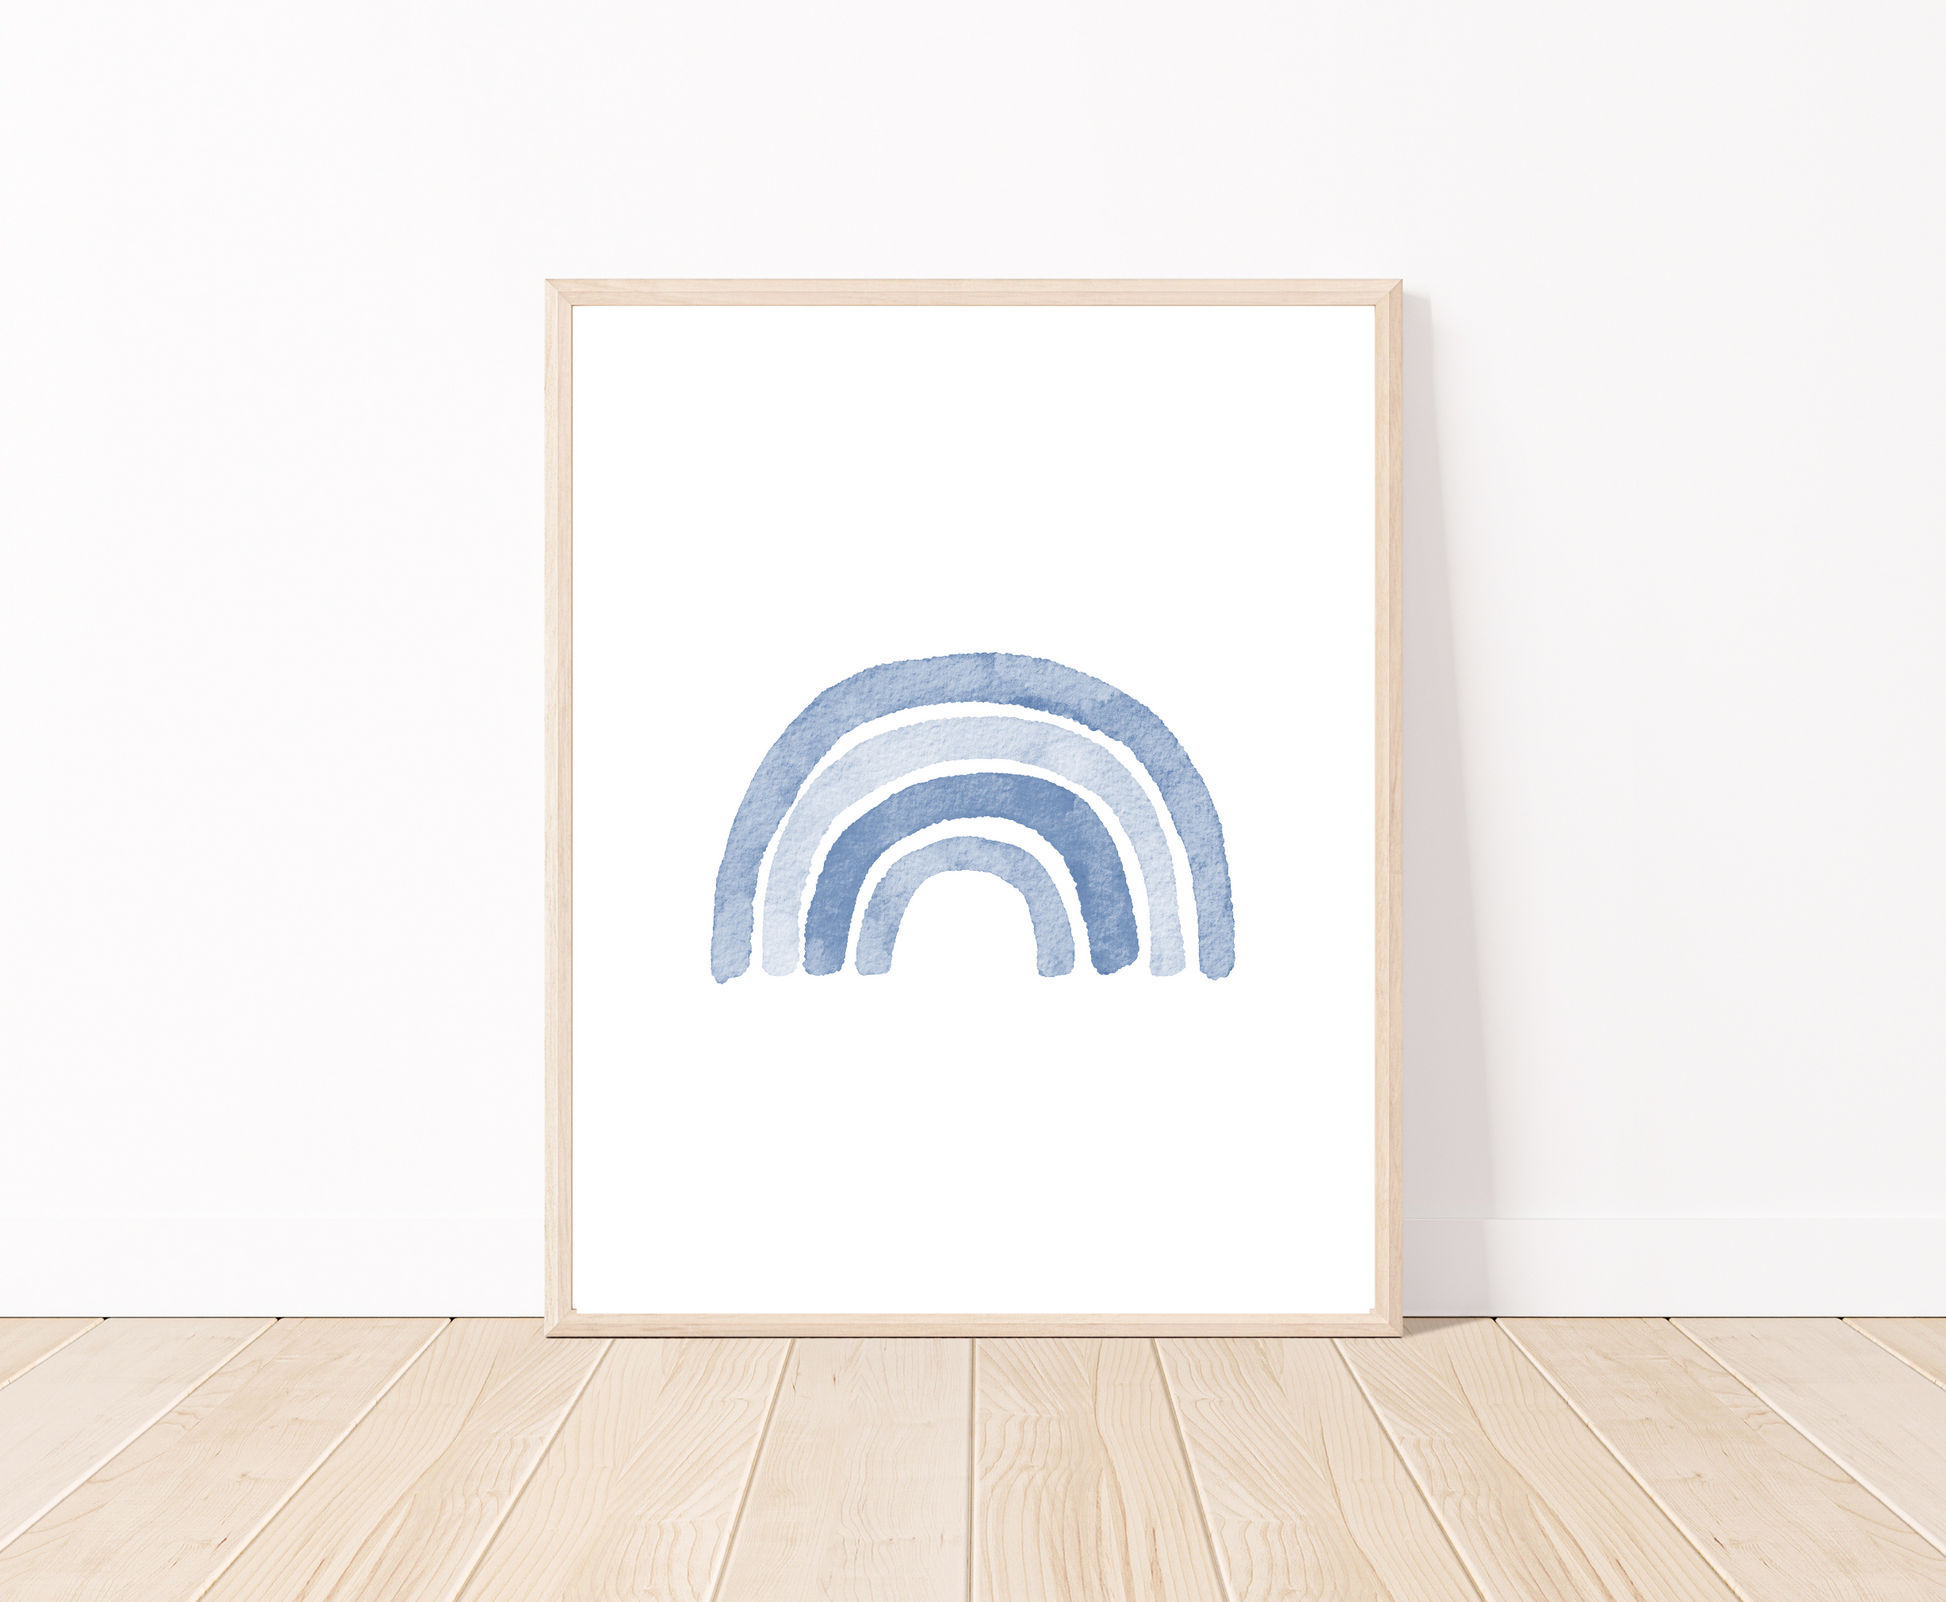 A digital poster is placed on a white wall and parquet flooring and shows a baby blue rainbow.